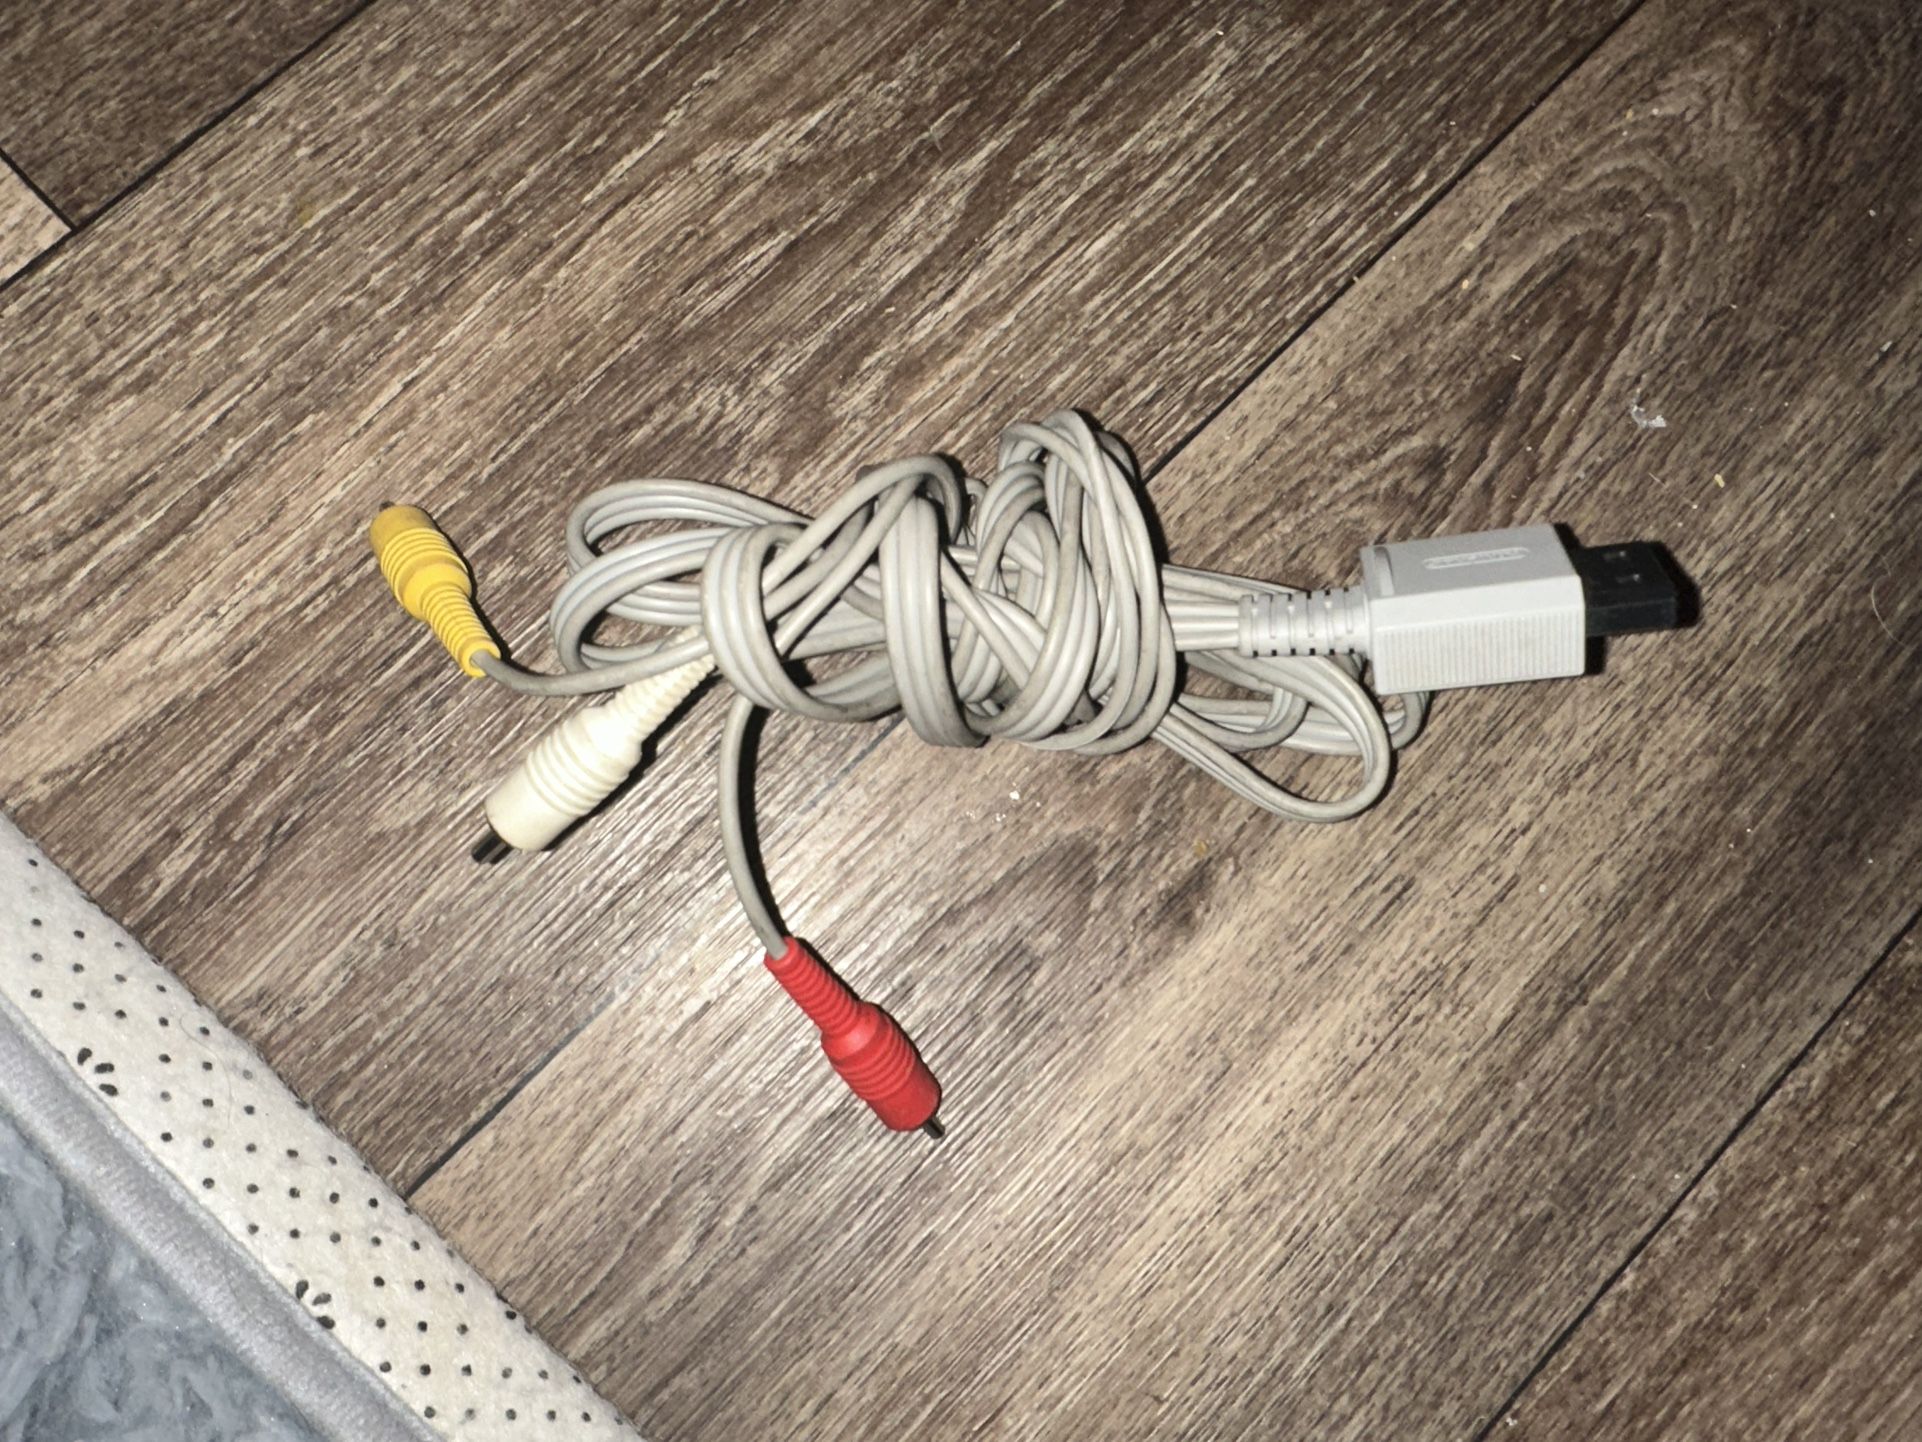 Used Original Nintendo Wii U Audio Video A/V Cable 6' inch in excellent condition located Off Simmons and lake mead area asking $5 